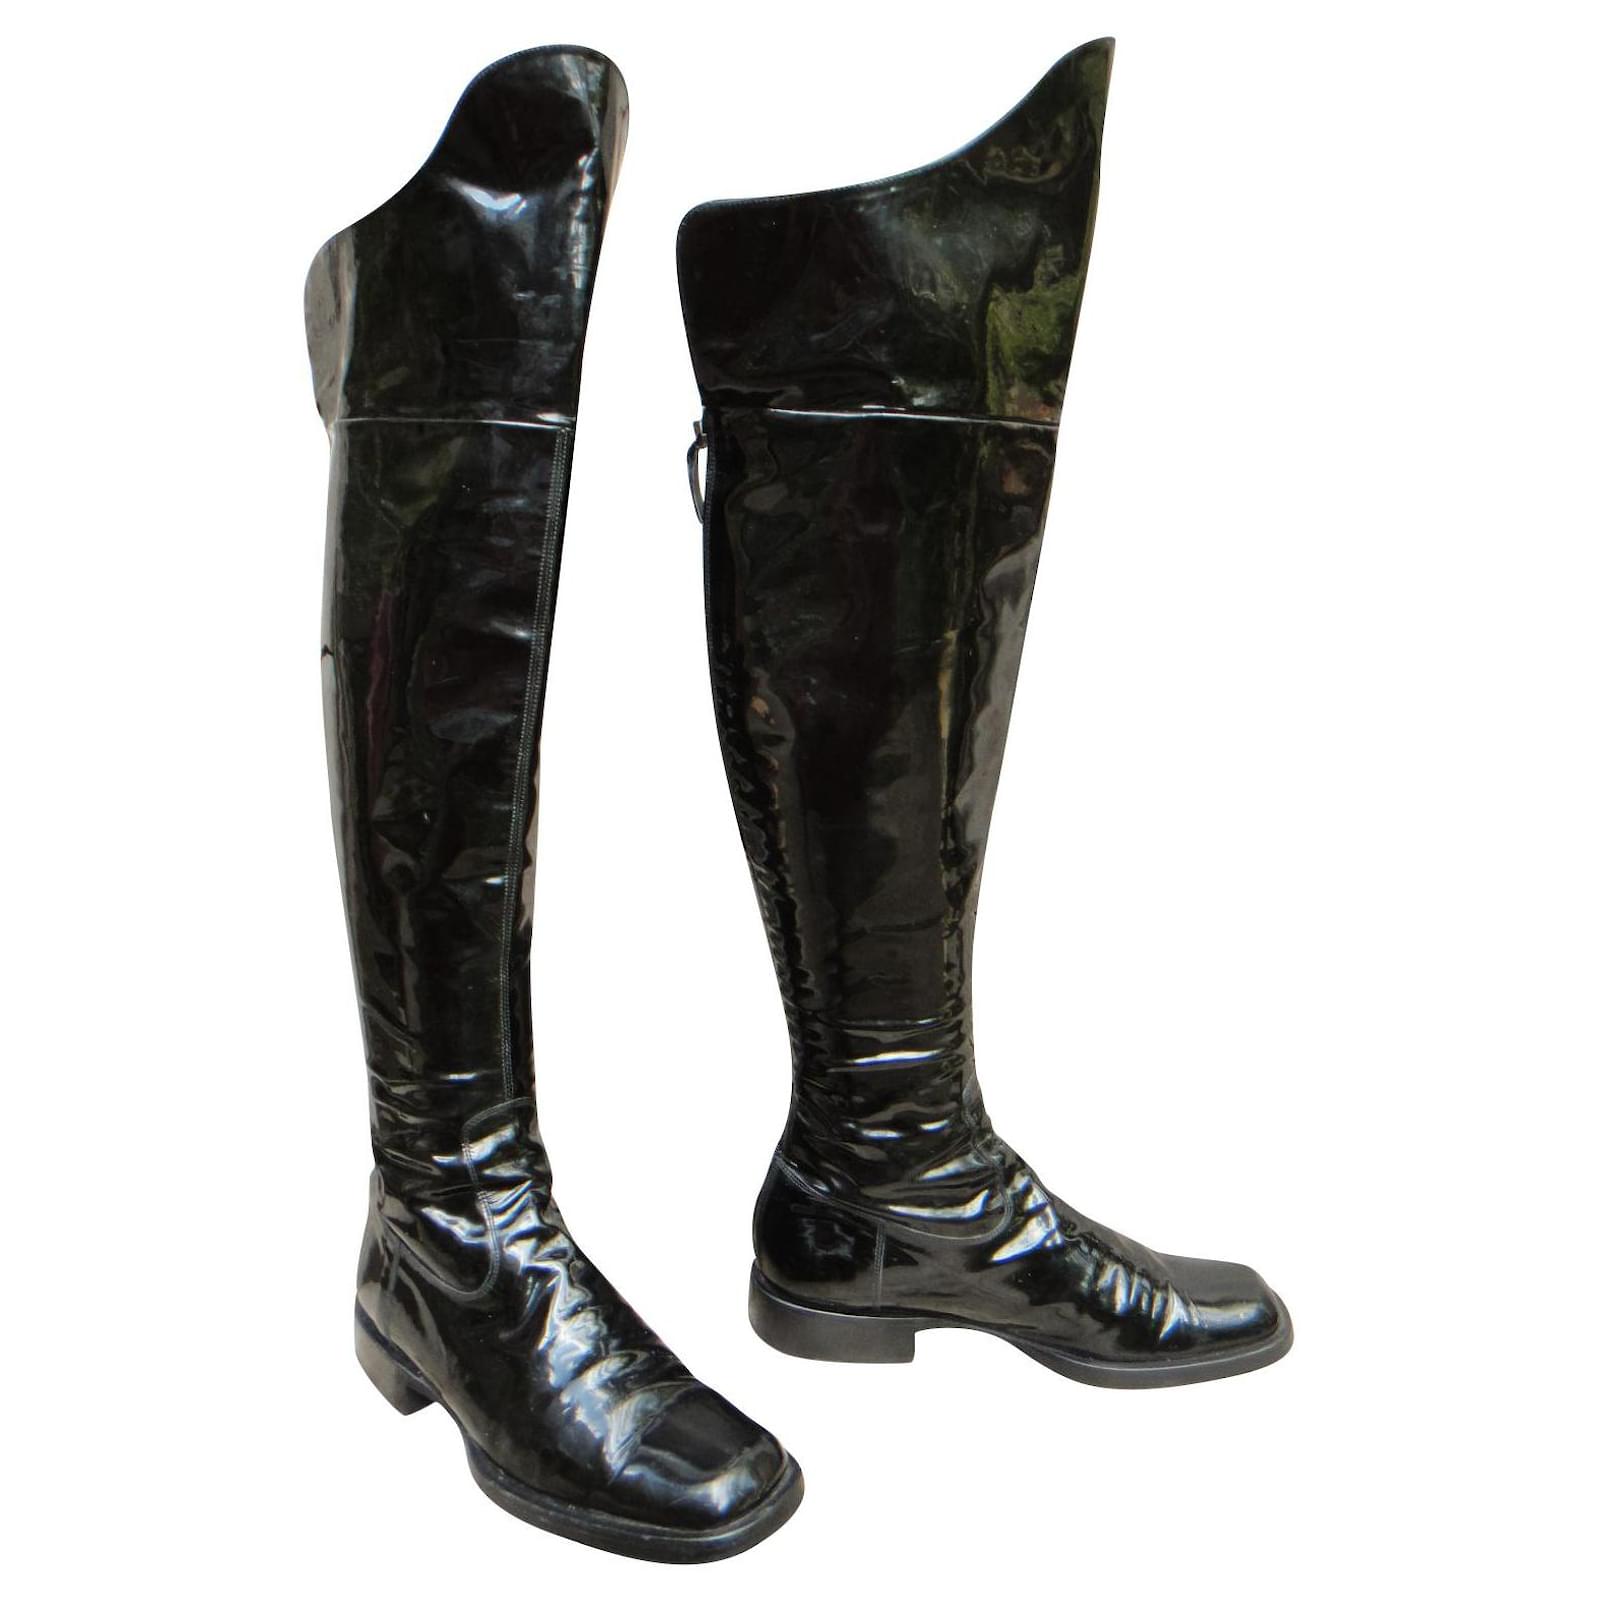 SHOES BOOTS CHANEL G26293 Thigh high boots 37 BLACK PATENT LEATHER BLACK  BOOTS